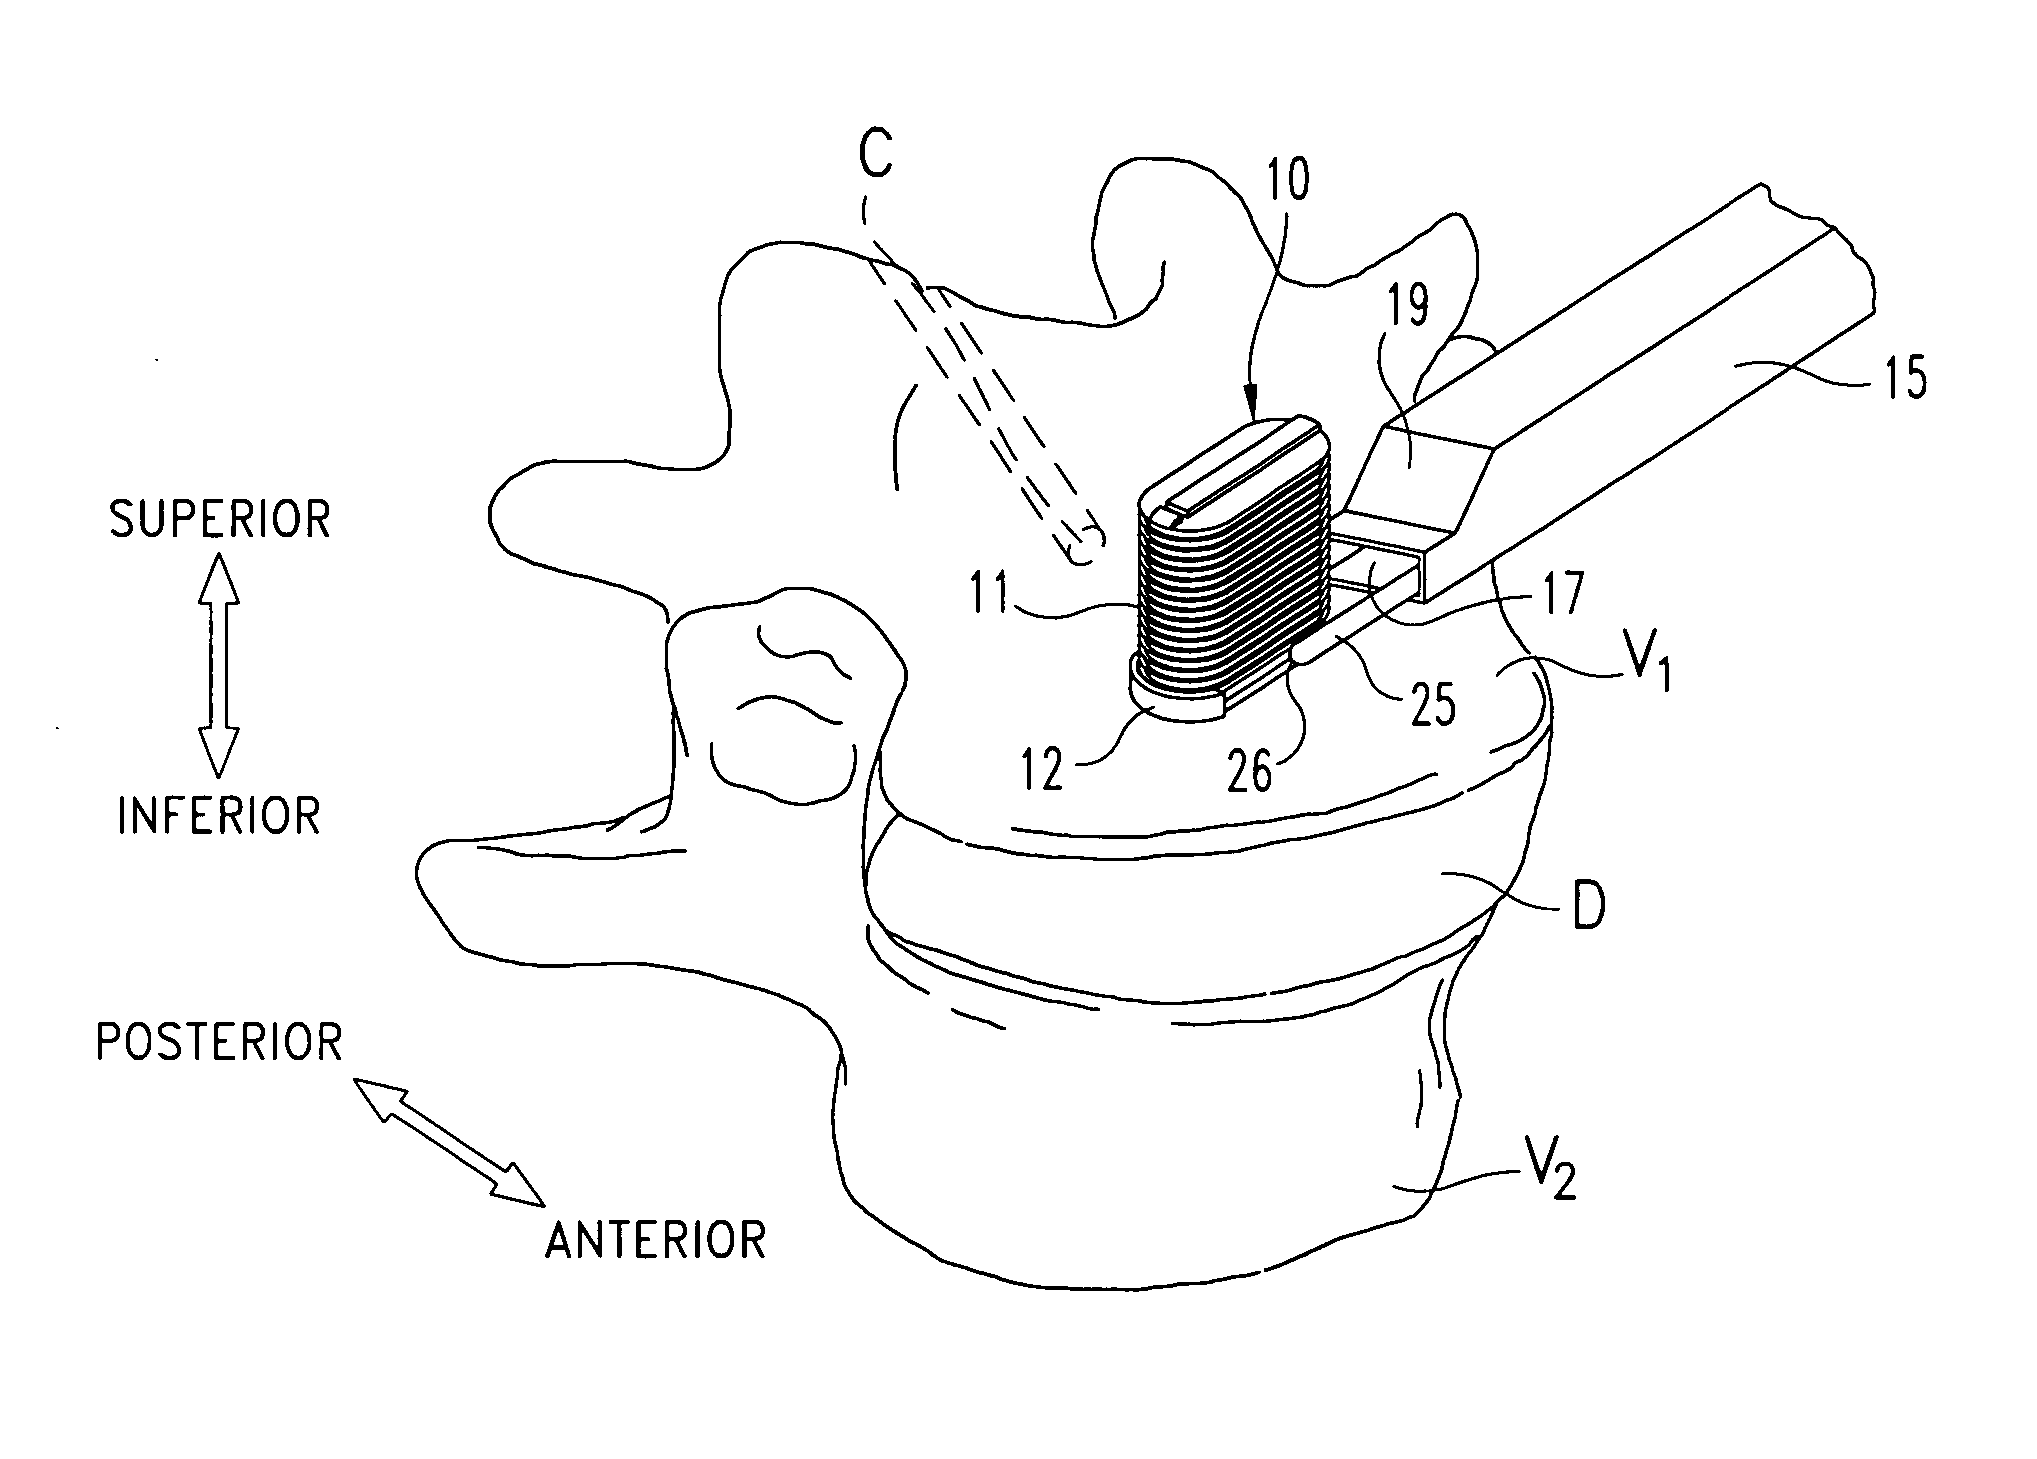 Apparatus and method for injecting fluent material at a distracted tissue site